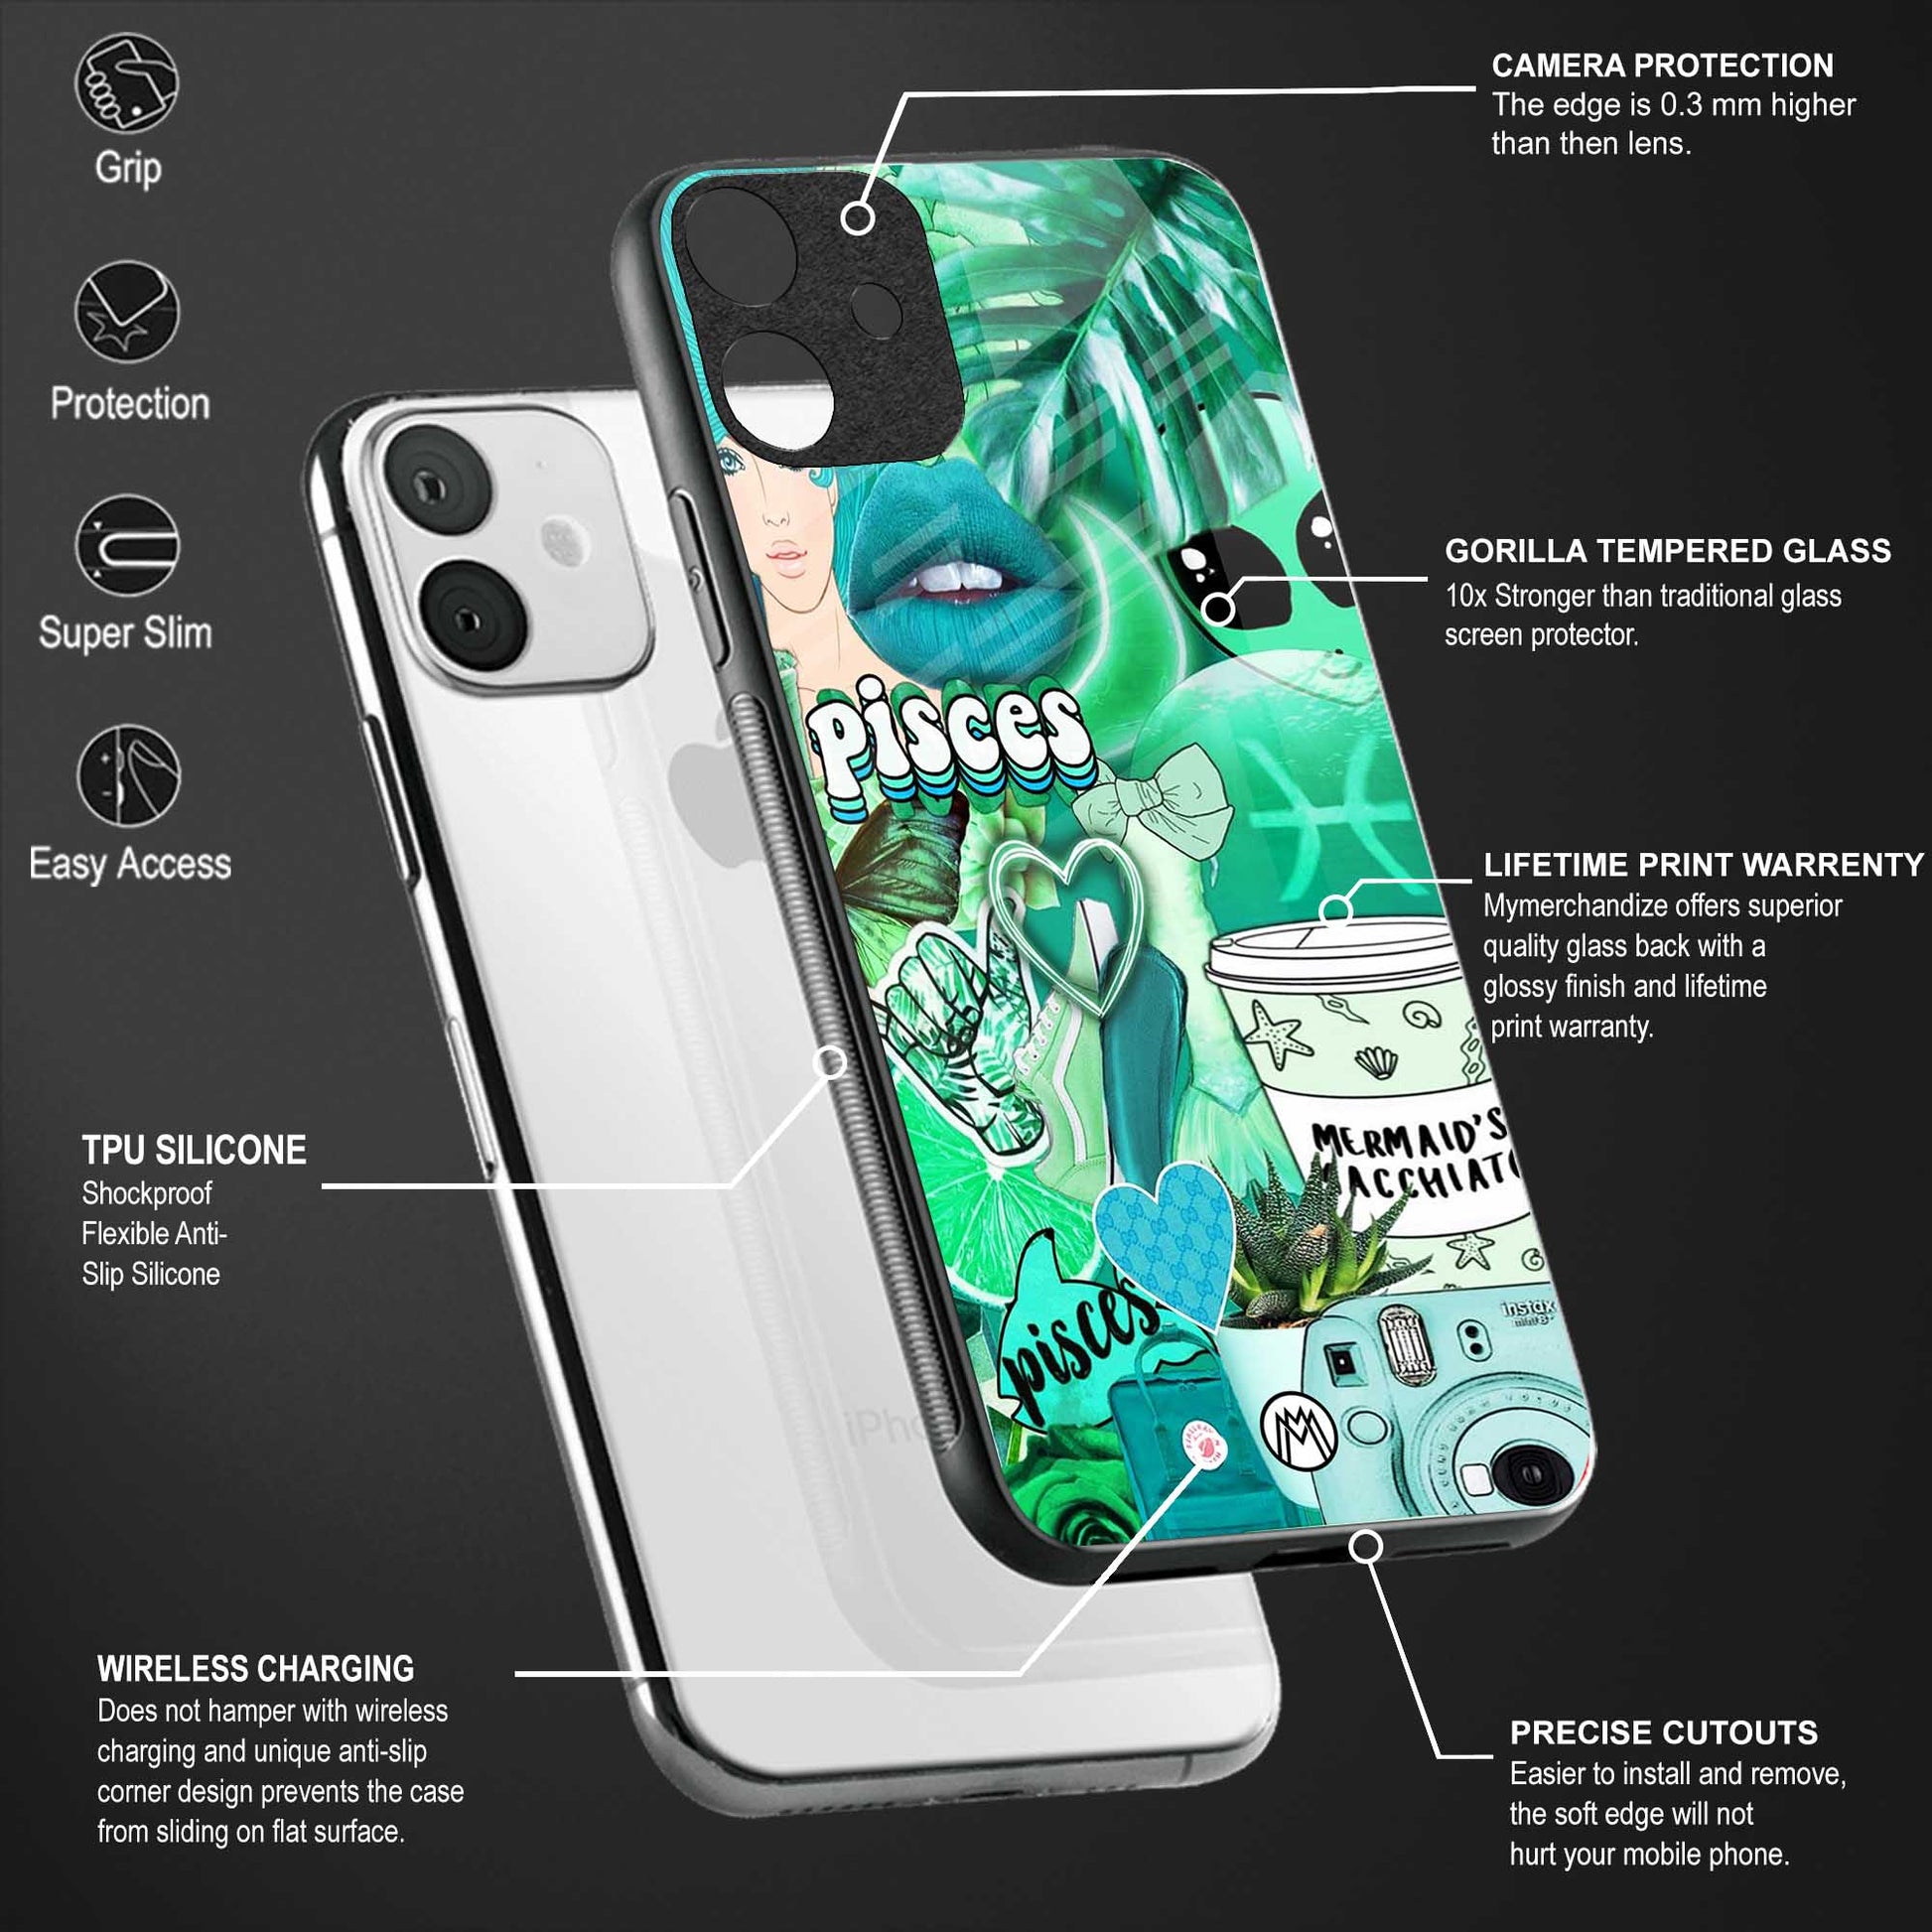 pisces aesthetic collage back phone cover | glass case for samsung galaxy a23